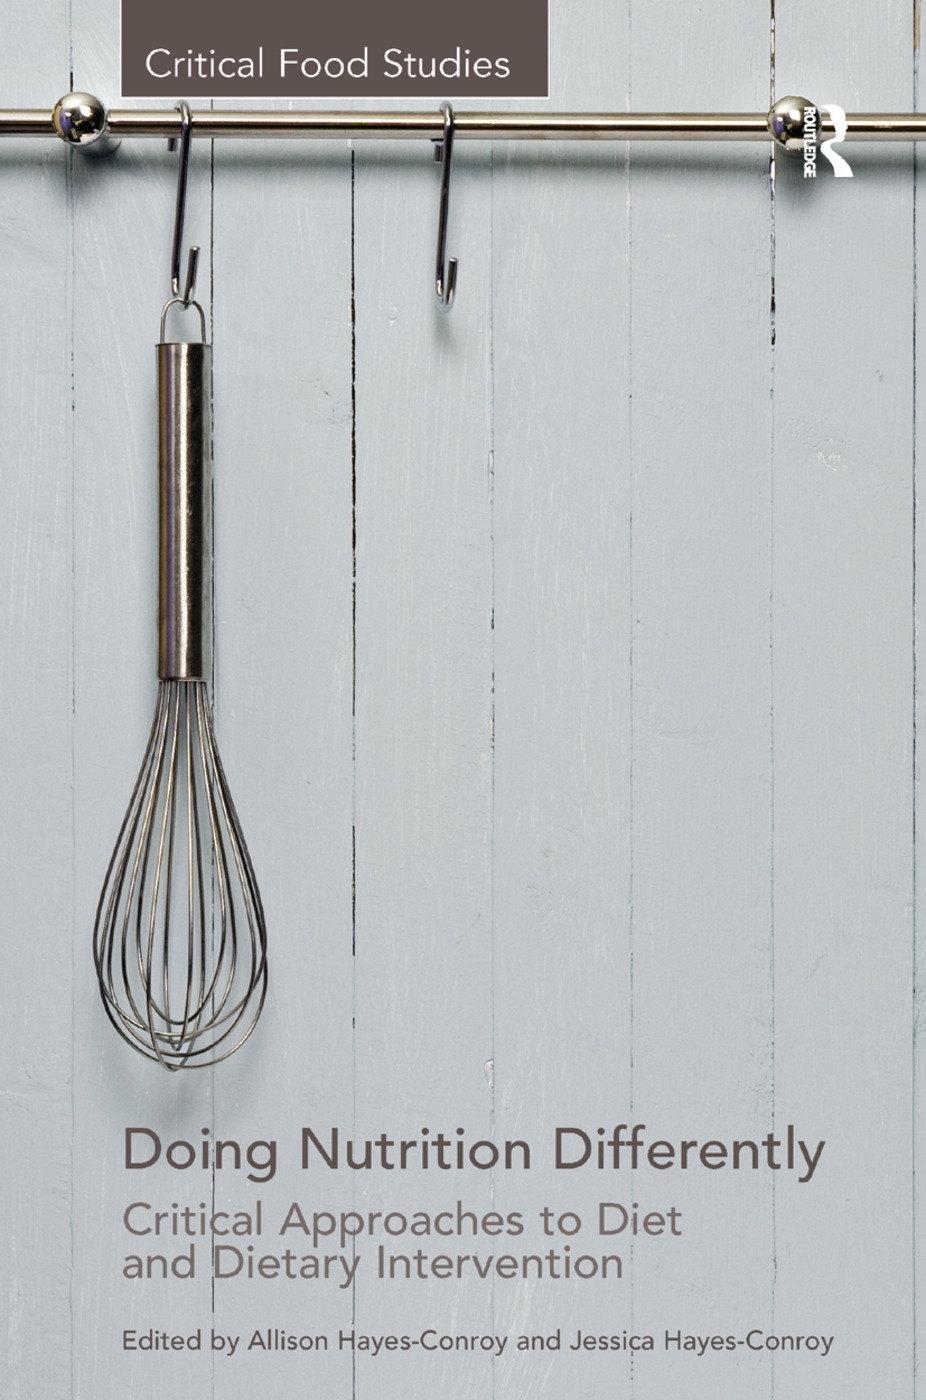 Doing Nutrition Differently: Critical Approaches to Diet and Dietary Intervention. Edited by Allison Hayes-Conroy, Jessica Hayes-Conroy